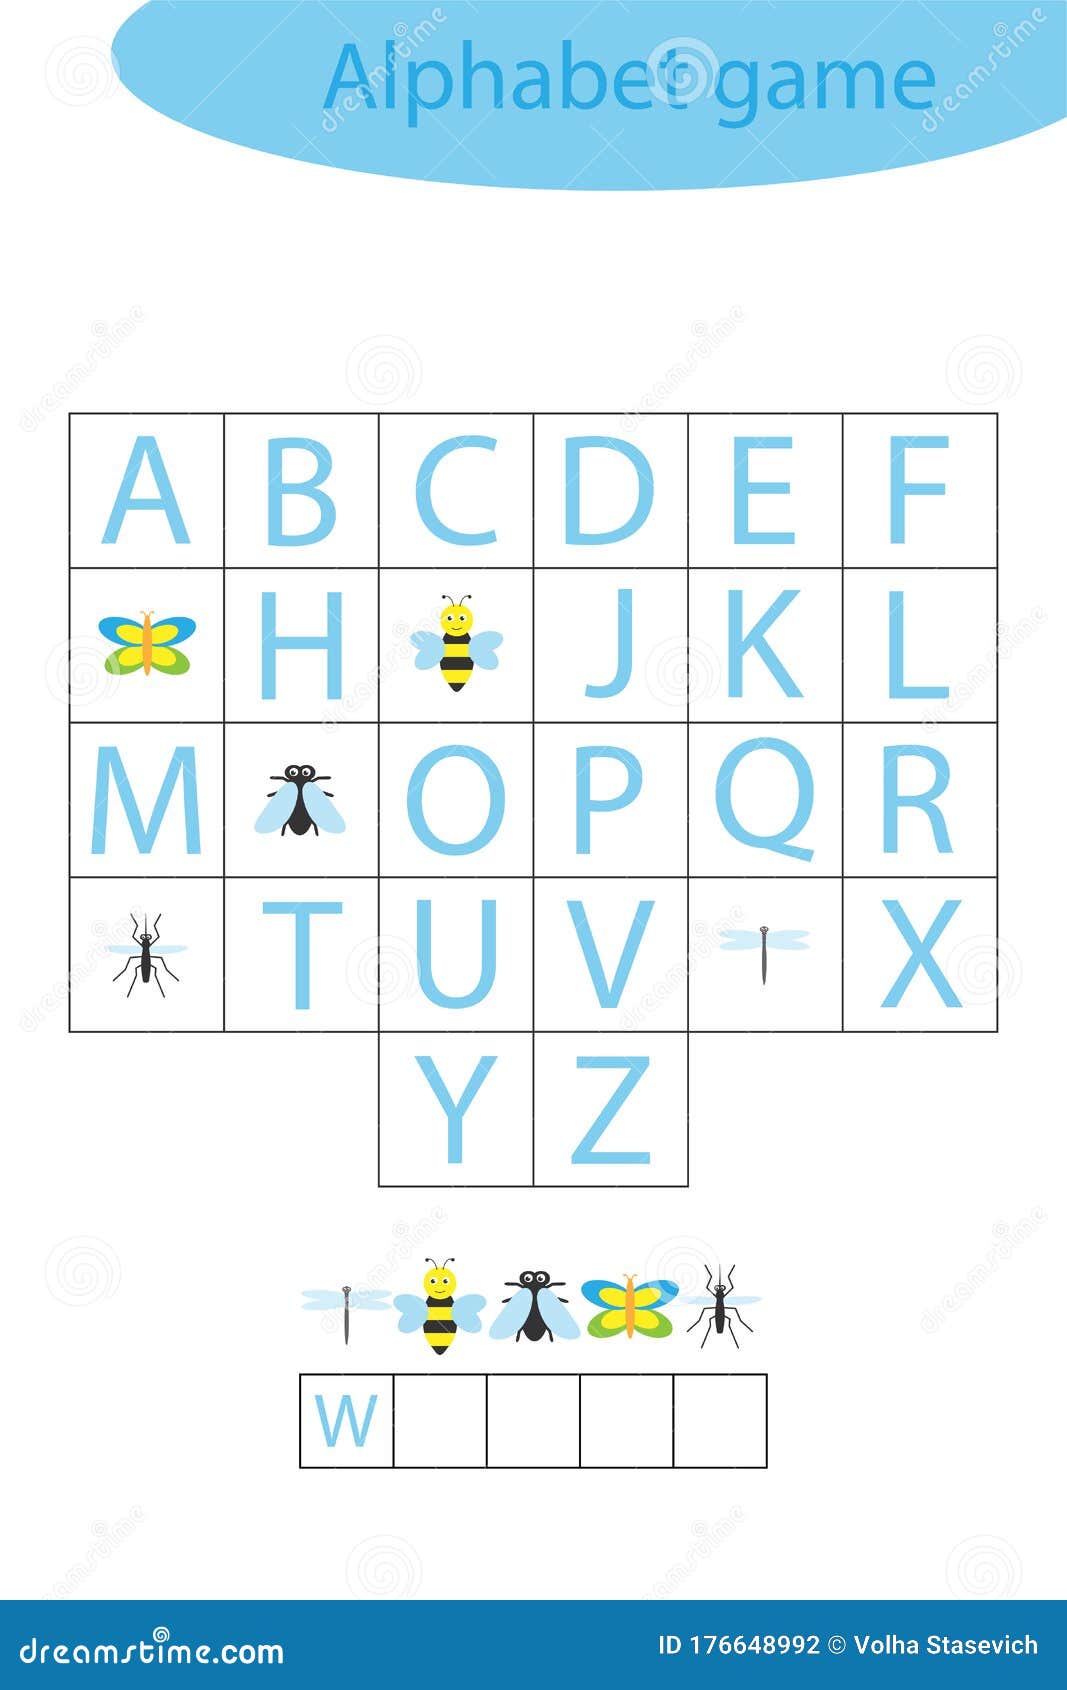 Insect Alphabet Game For Children Make A Word Preschool Worksheet Activity For Kids Educational Spelling Scramble Stock Vector Illustration Of Page Play